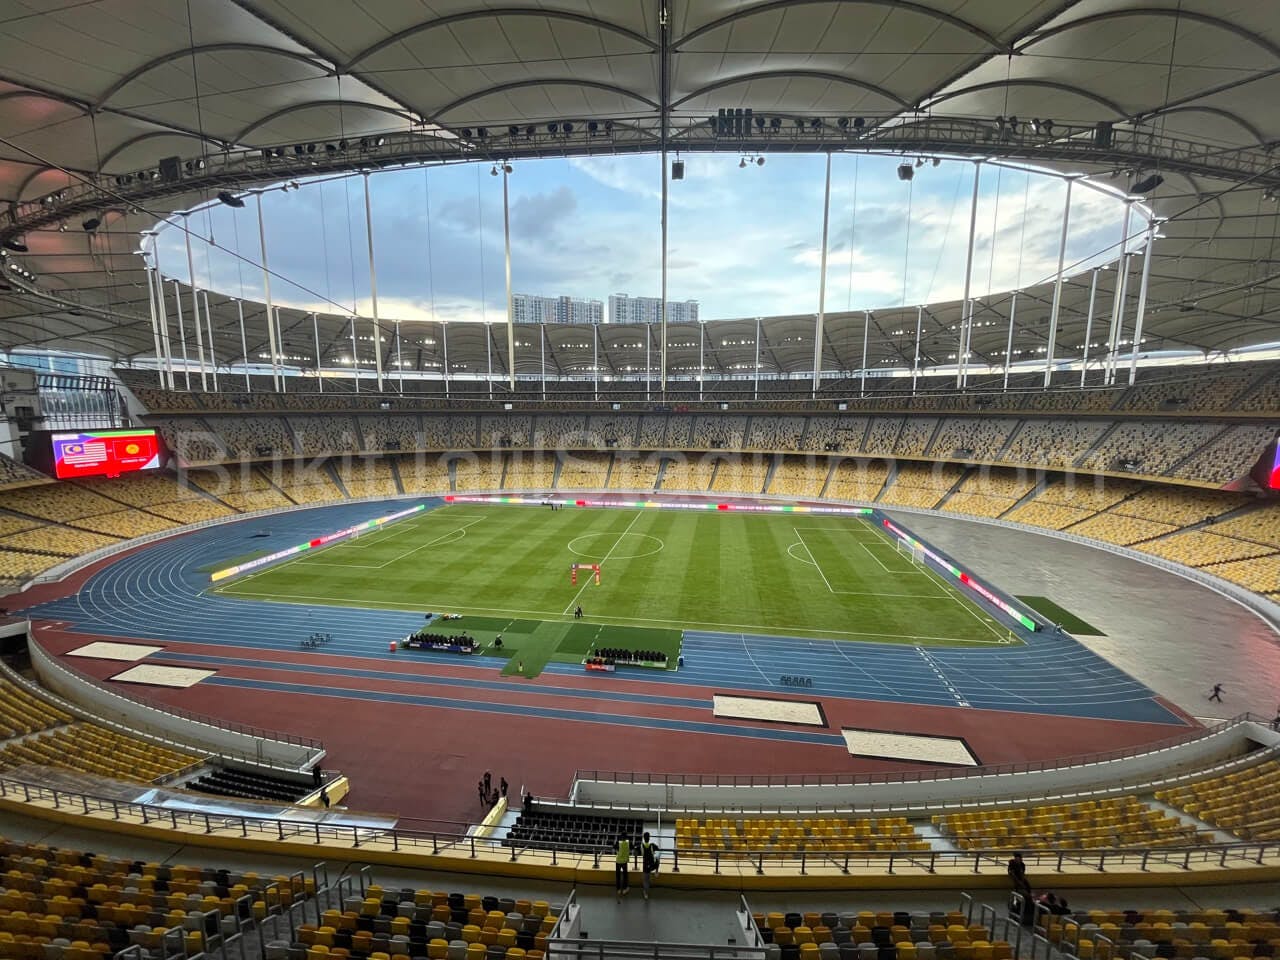 0.5x View of Bukit Jalil field from section 330 of Stadium Bukit Jalil.